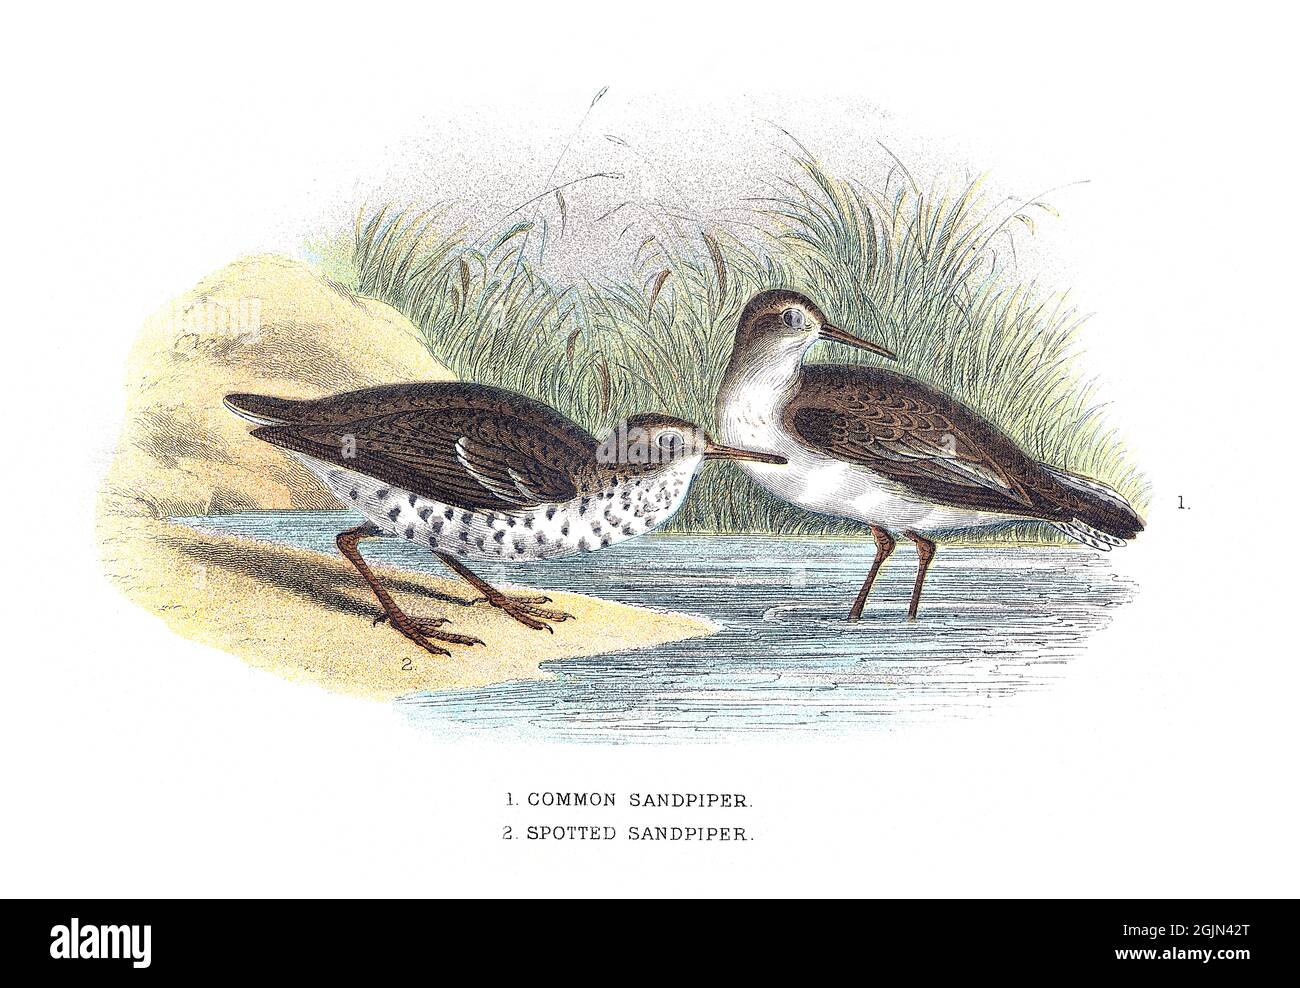 Common sandpiper, Actitis hypoleucos, and Spotted sandpiper, Actitis macularius make up the genus Actitis. Stock Photo